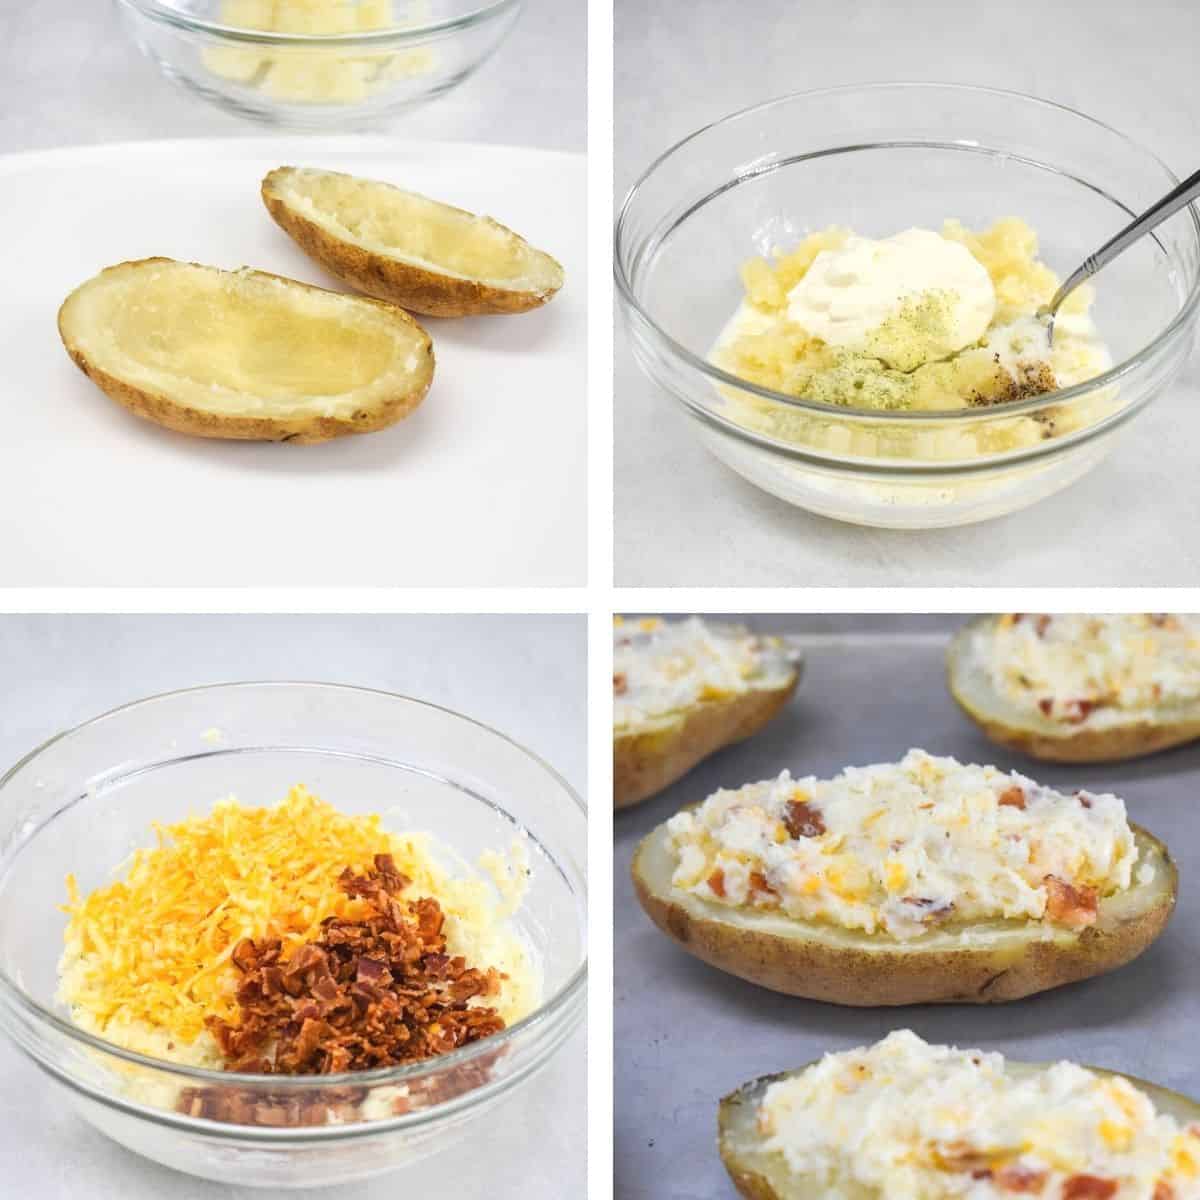 Four images showing the steps to scoop the potato, make the filling and stuff the potato.